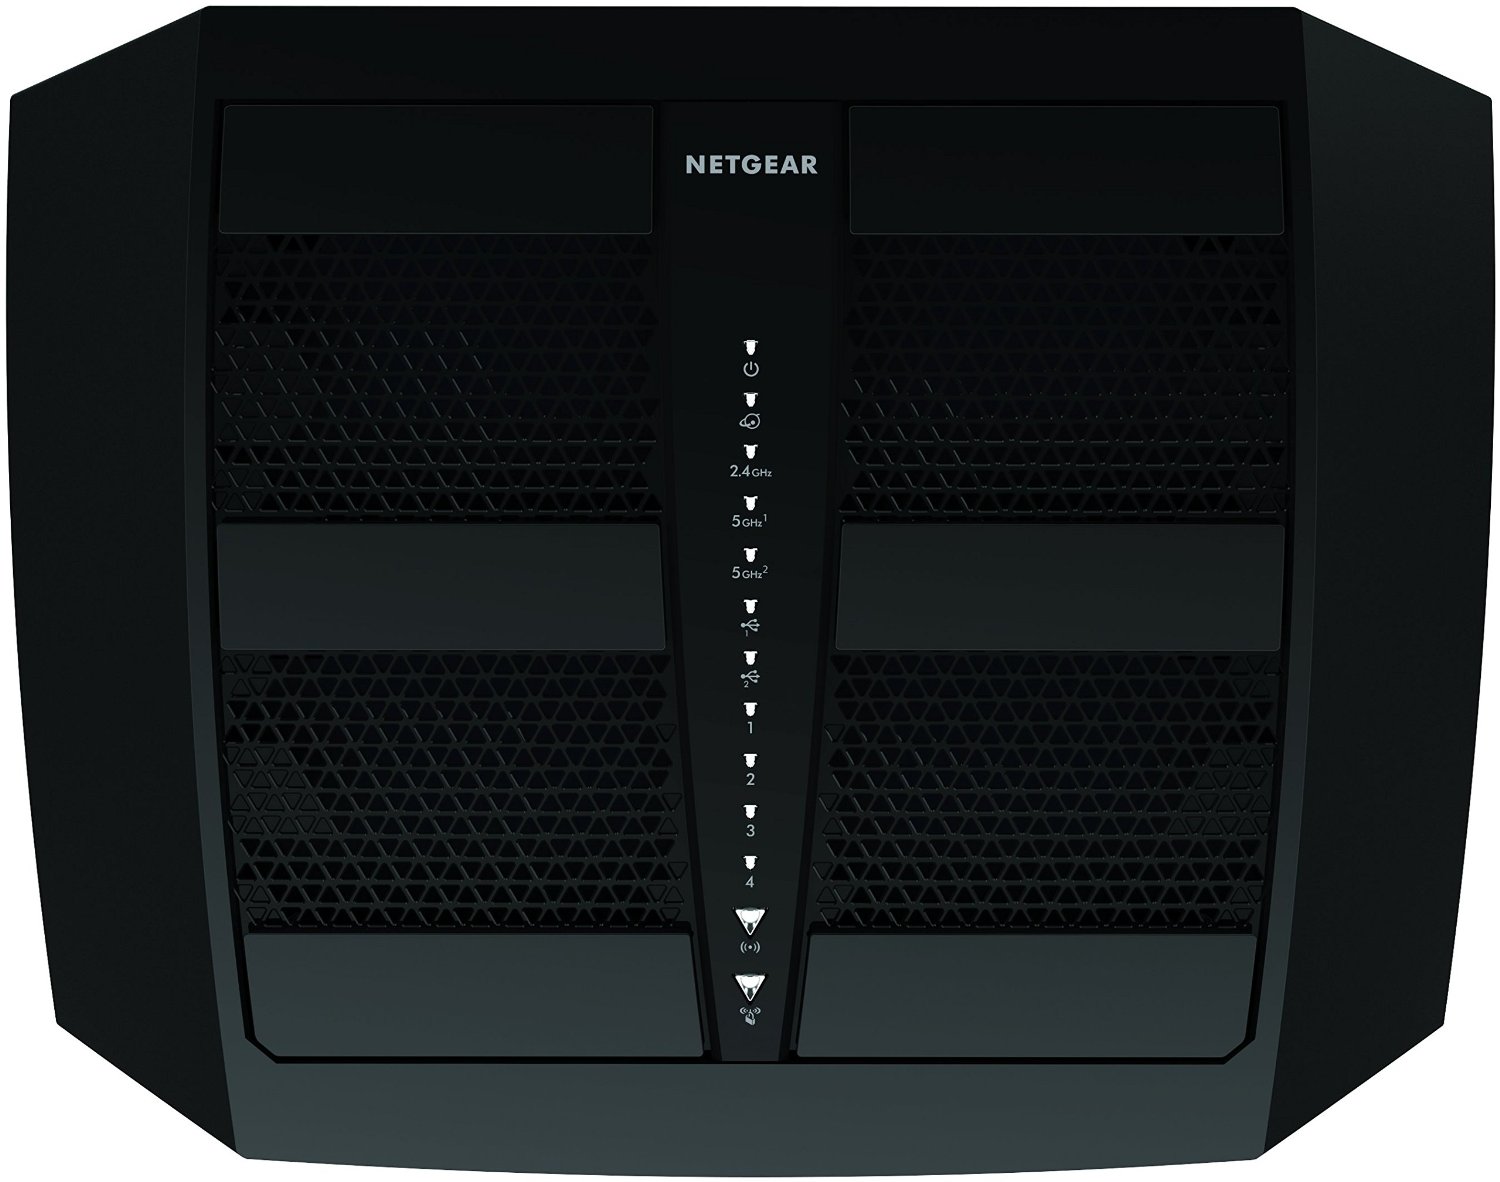 How To Upgrade Netgear Router Firmware